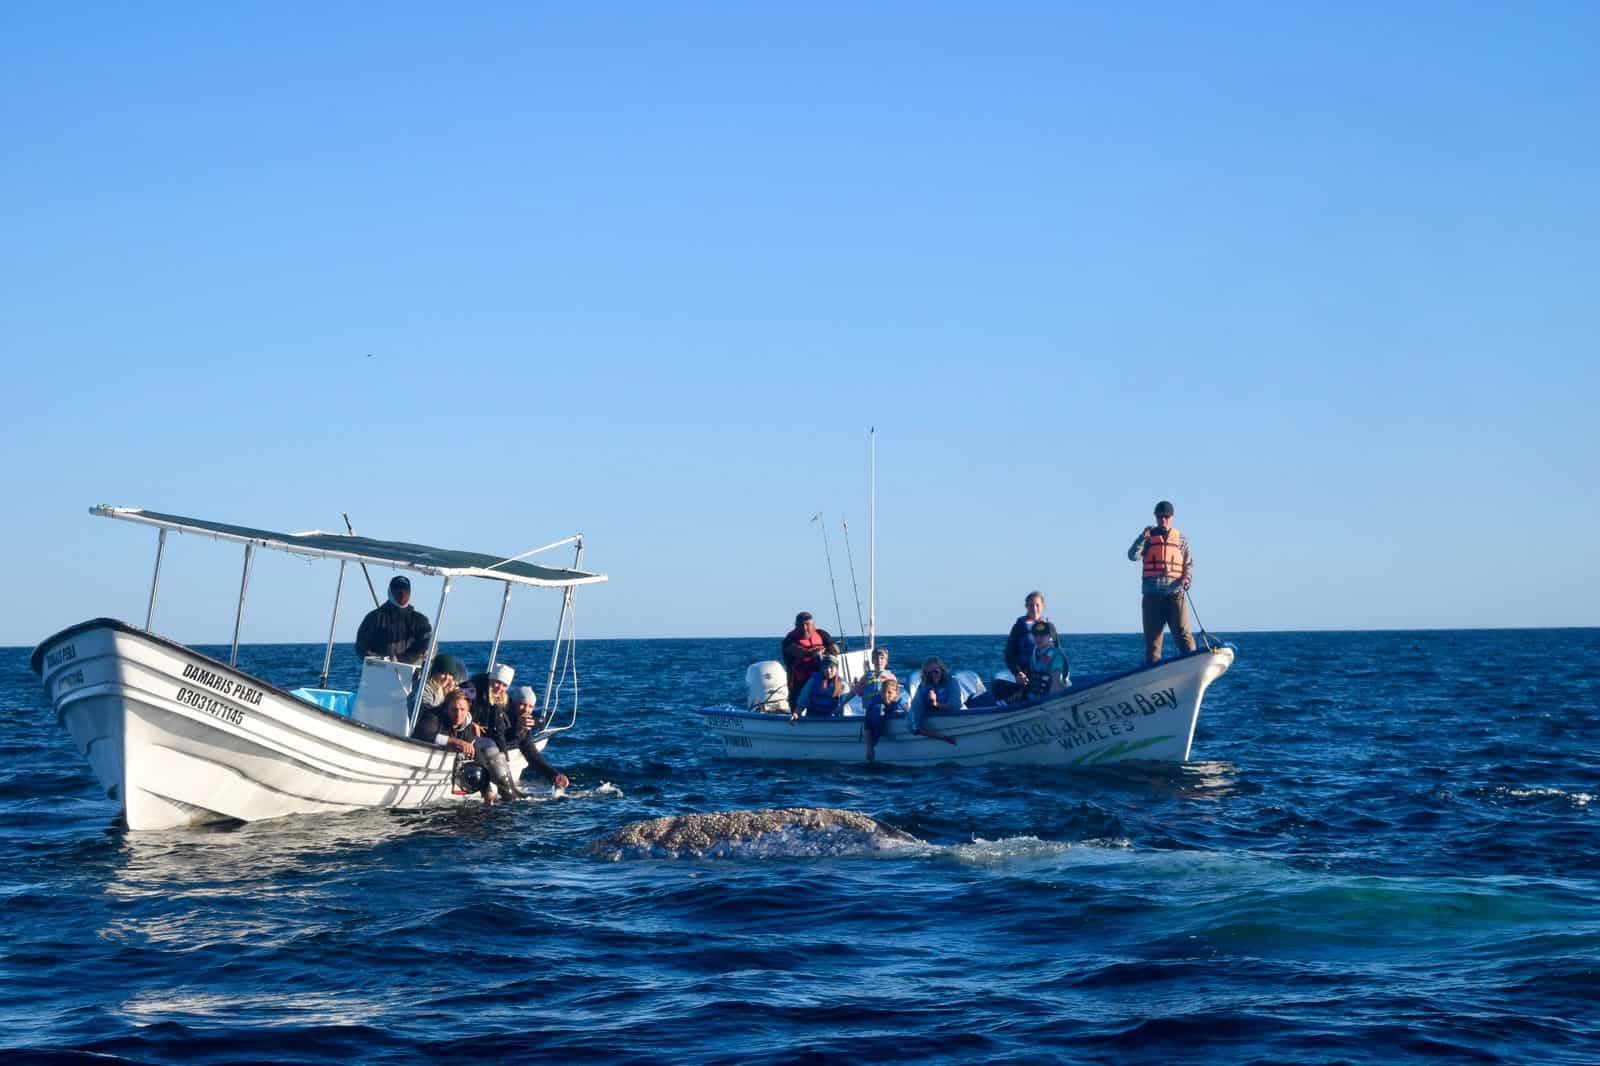 Tourist boats near a gray whale in BCS